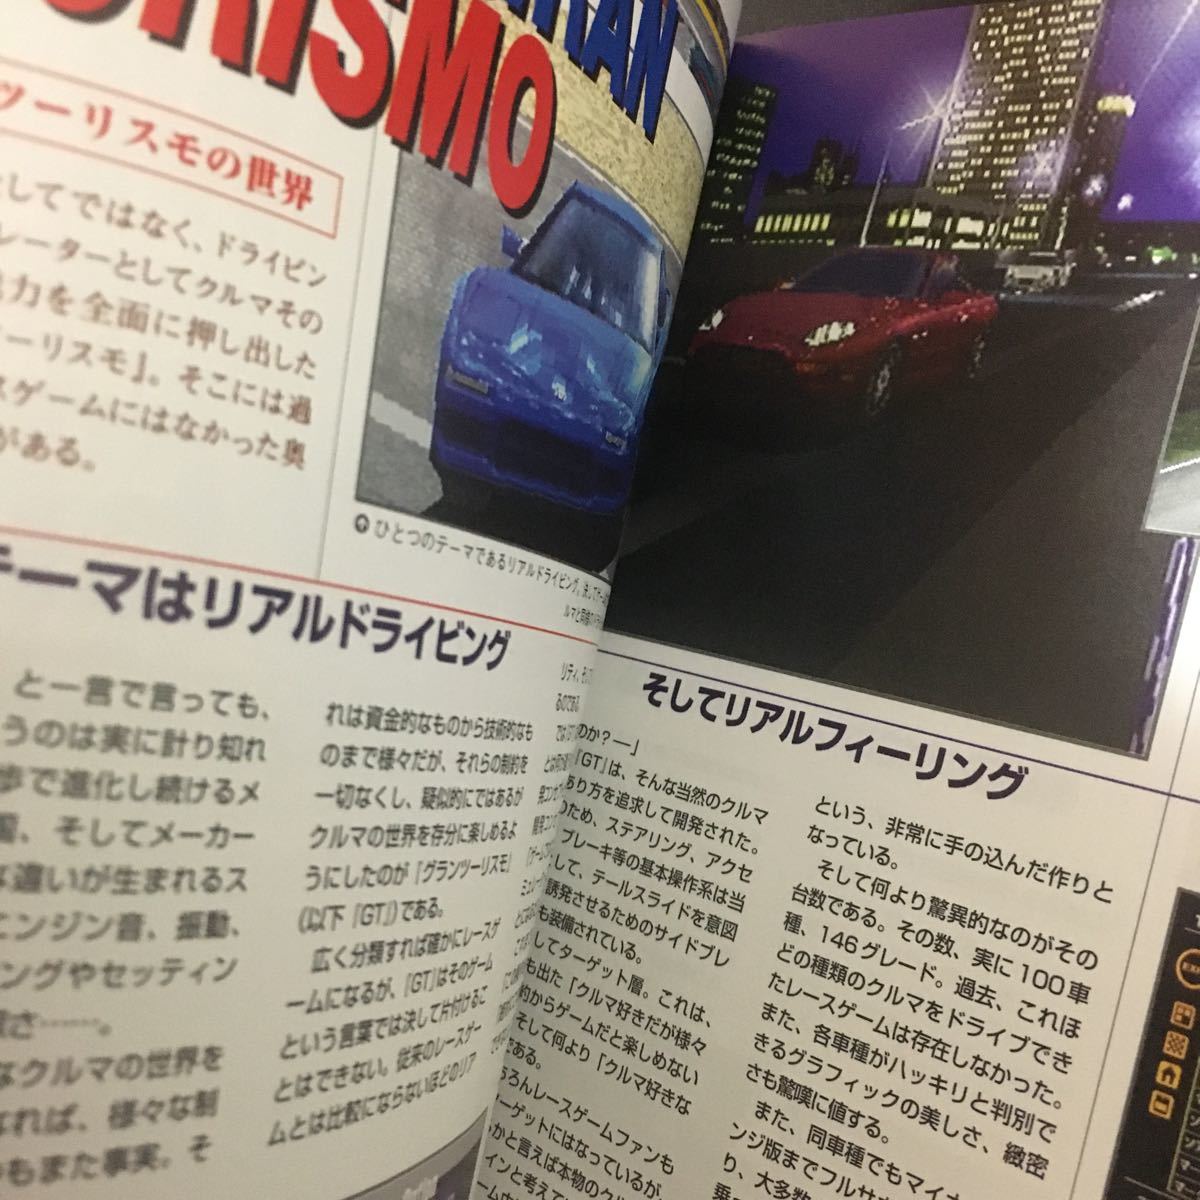 *book@ game [ obi post card equipped gran turismo official guidebook ] capture book automobile race car PS PlayStation 